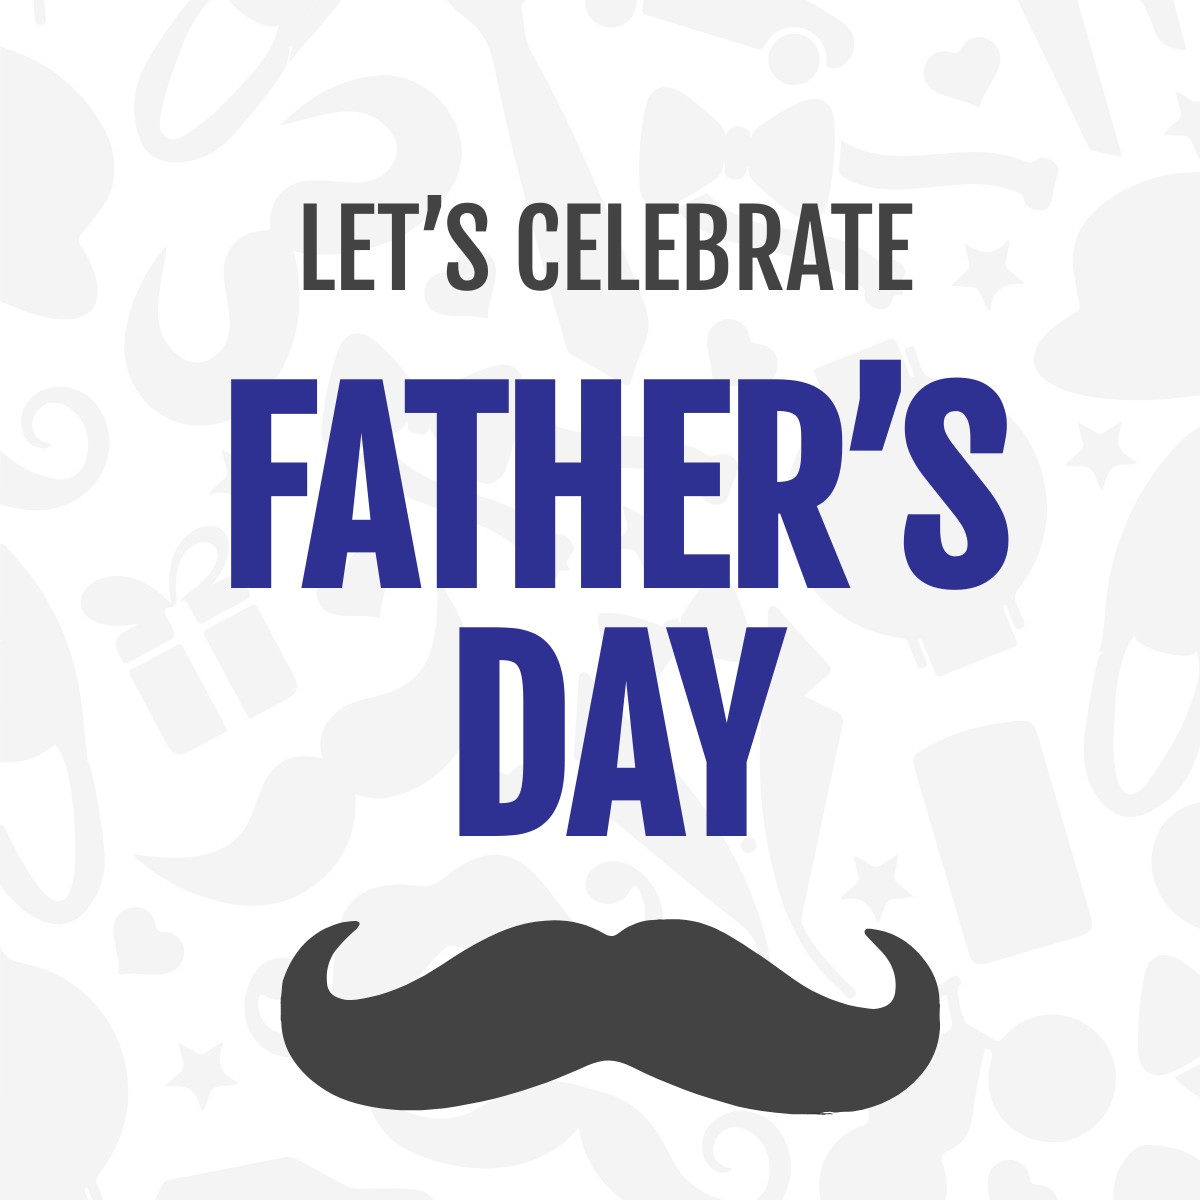 Father's Day Pinterest Board Cover Template